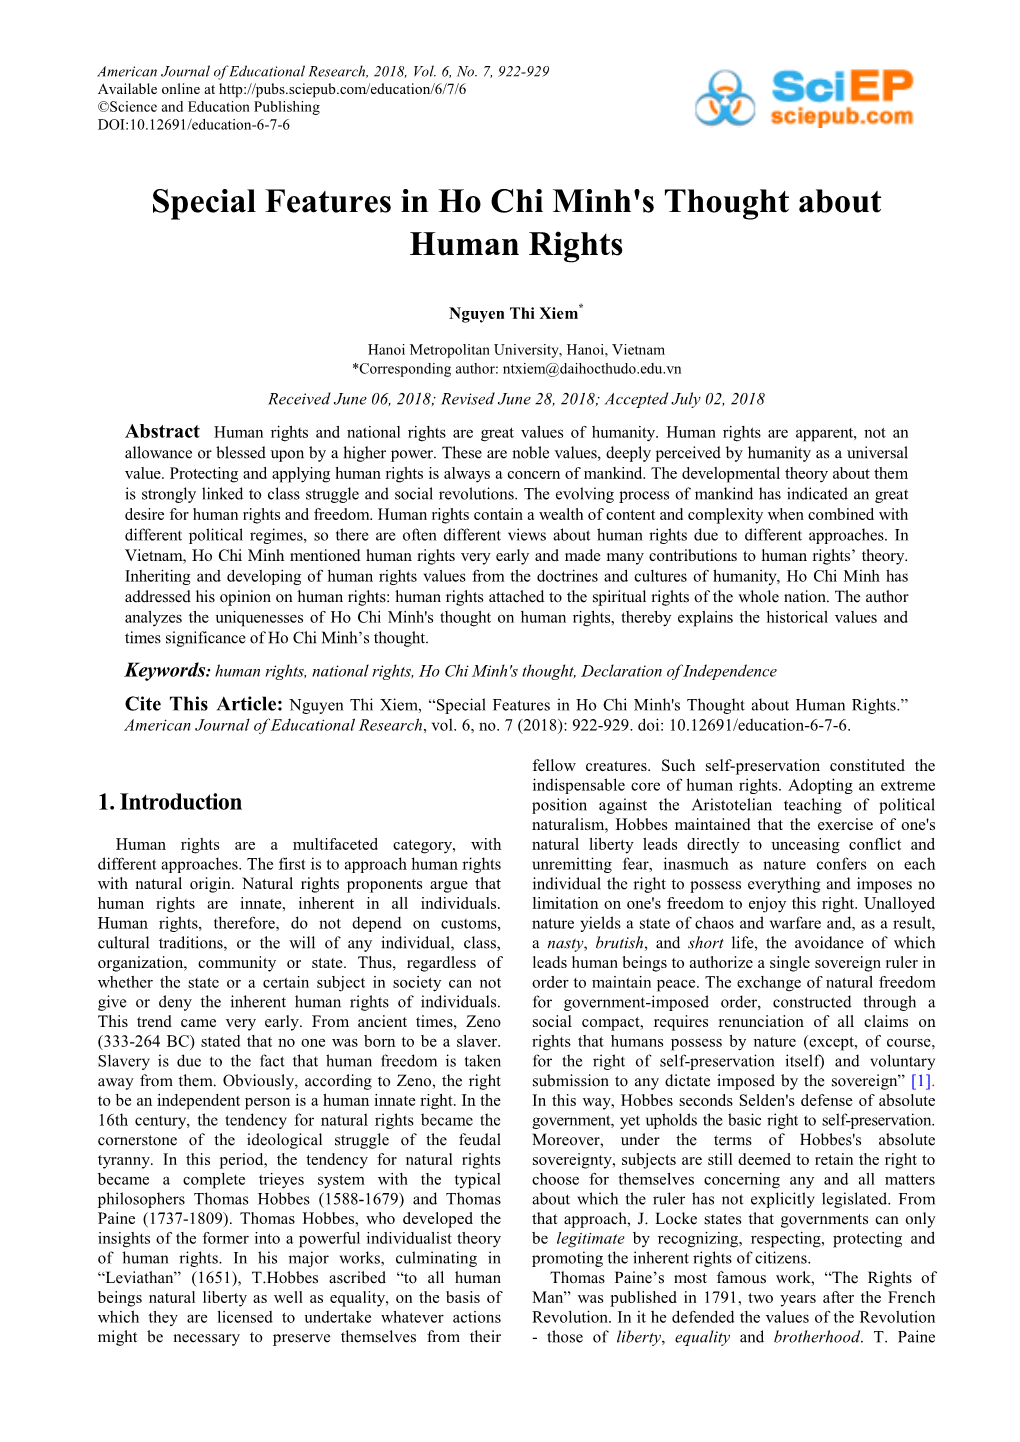 Special Features in Ho Chi Minh's Thought About Human Rights